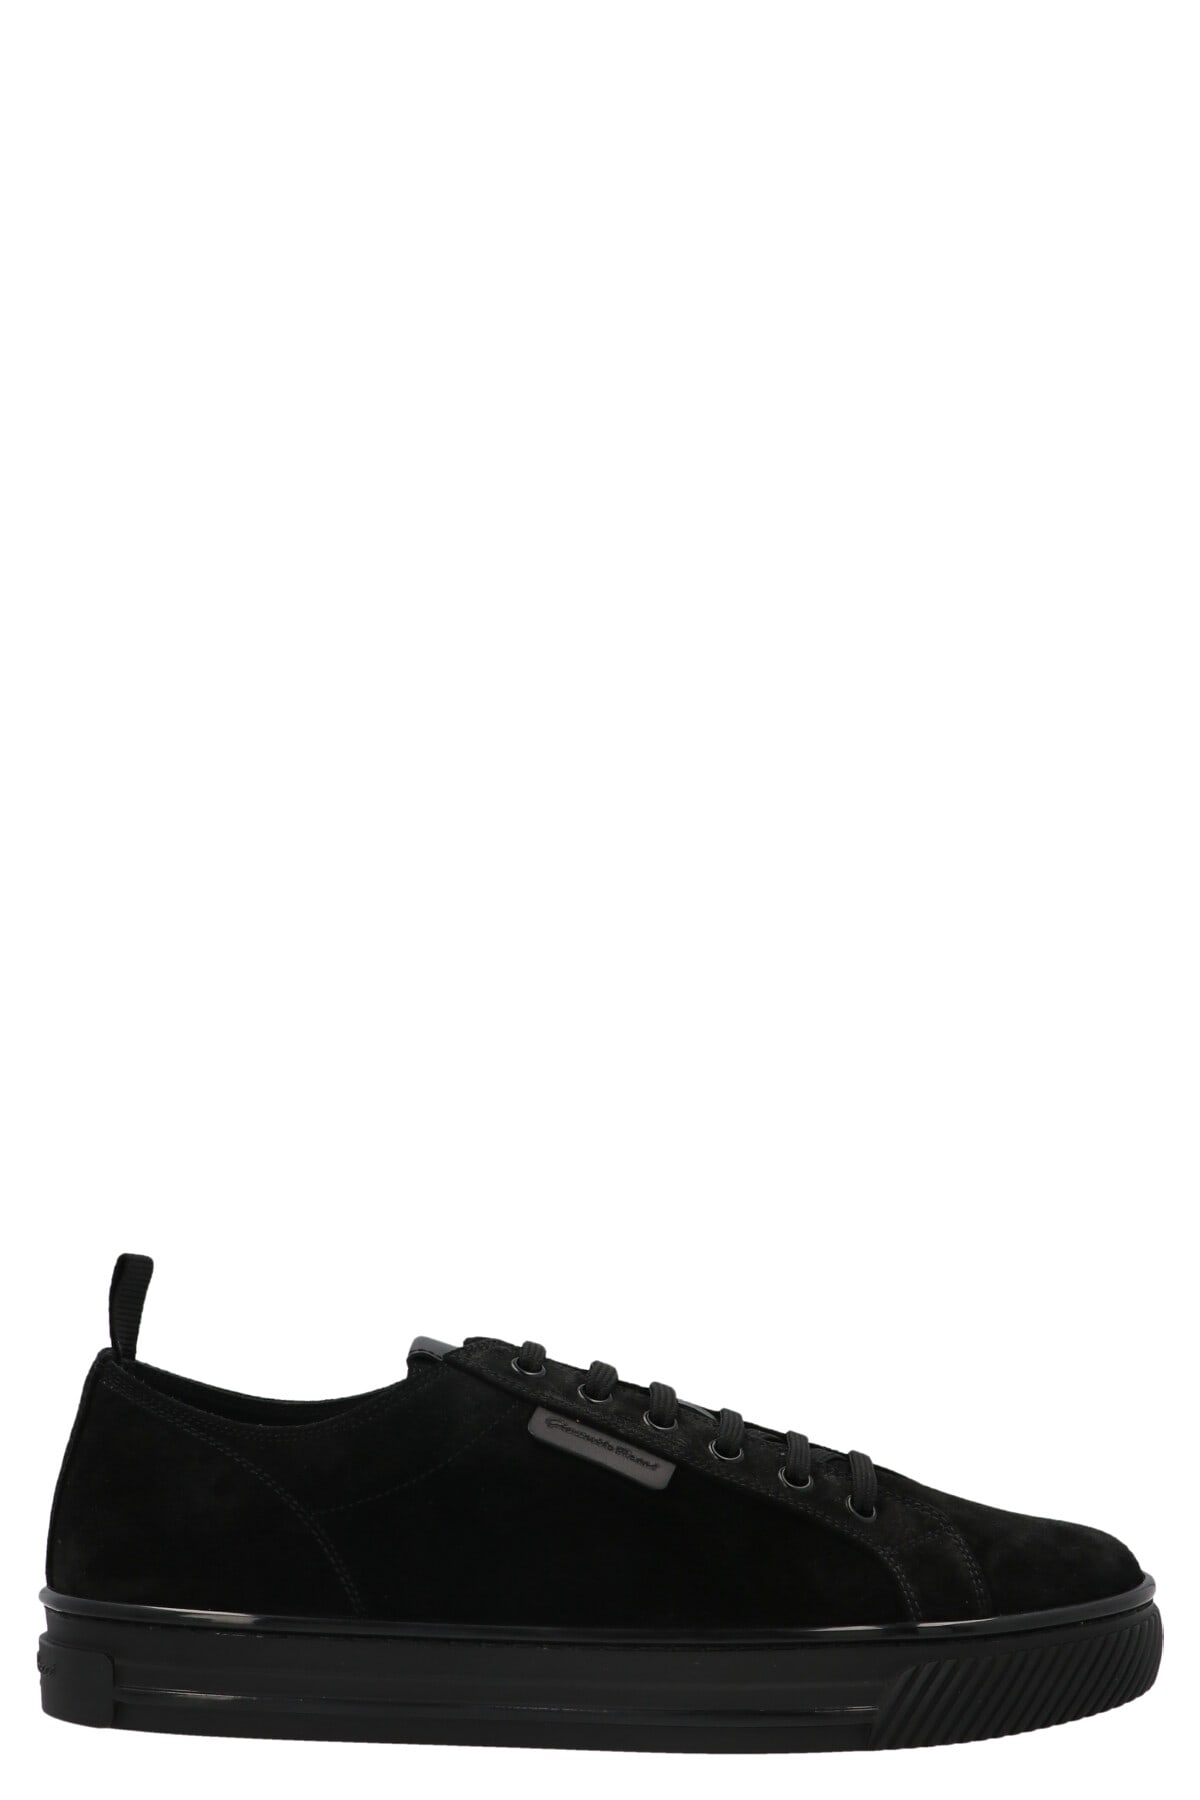 GIANVITO ROSSI 360 LOW SNEAKERS